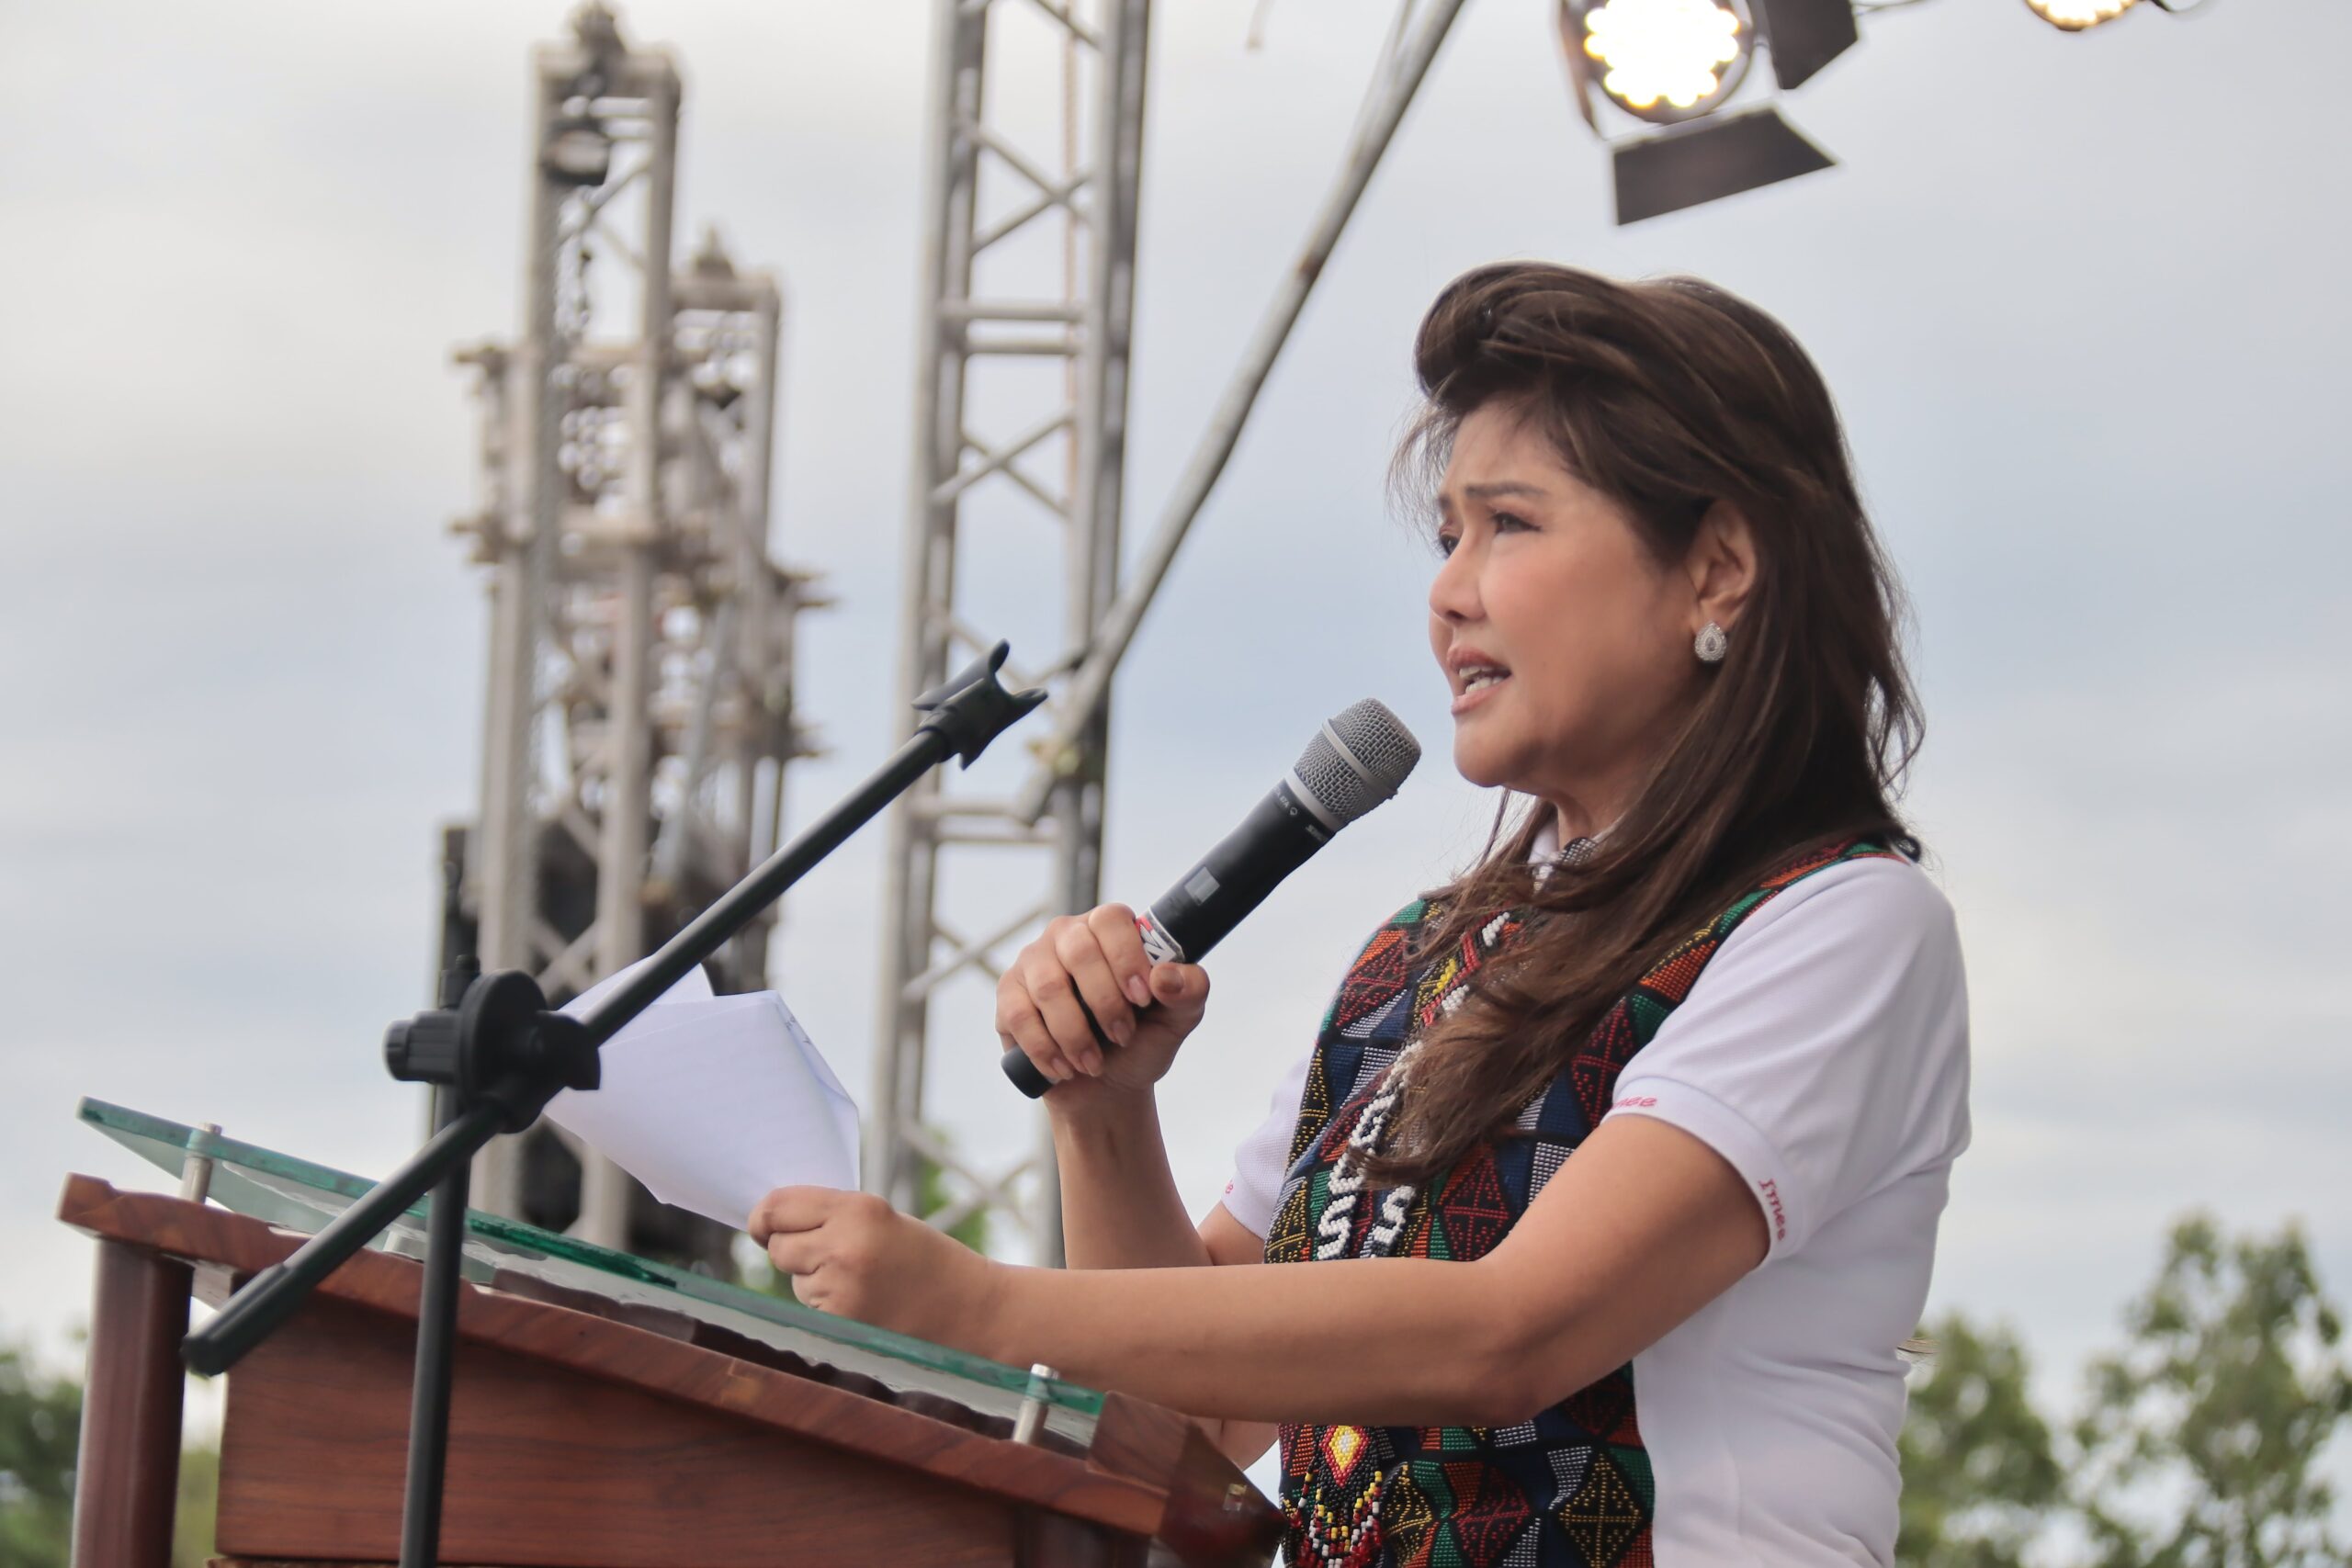 imee pushes for late father’s defense posture vs china’s aggression in wps